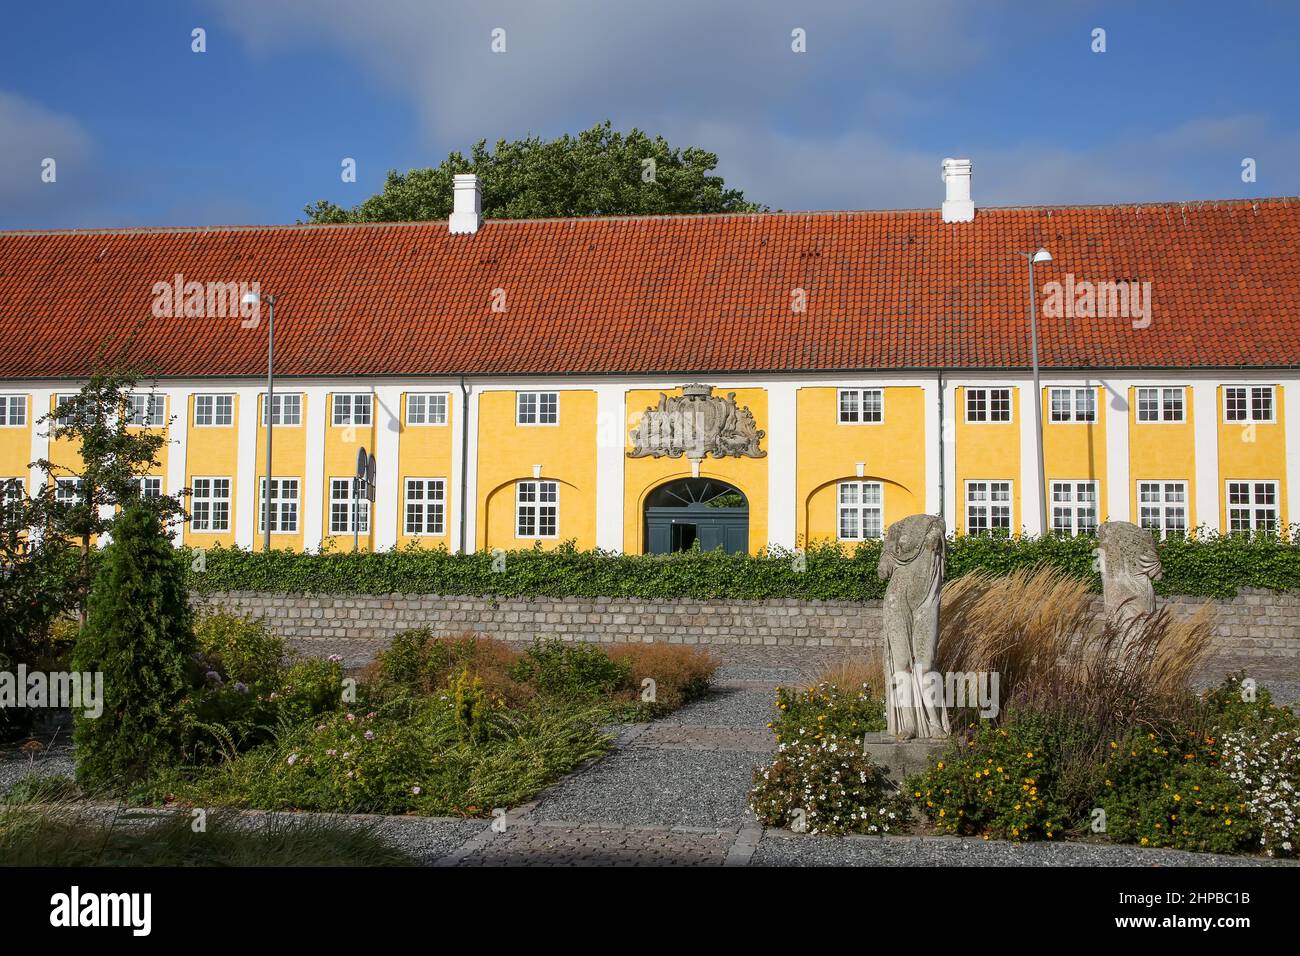 Kaalund Monastery is located in Kalundborg Municipality, Denmark. Historic yellow and white landmark building with gardens in the foreground. Stock Photo